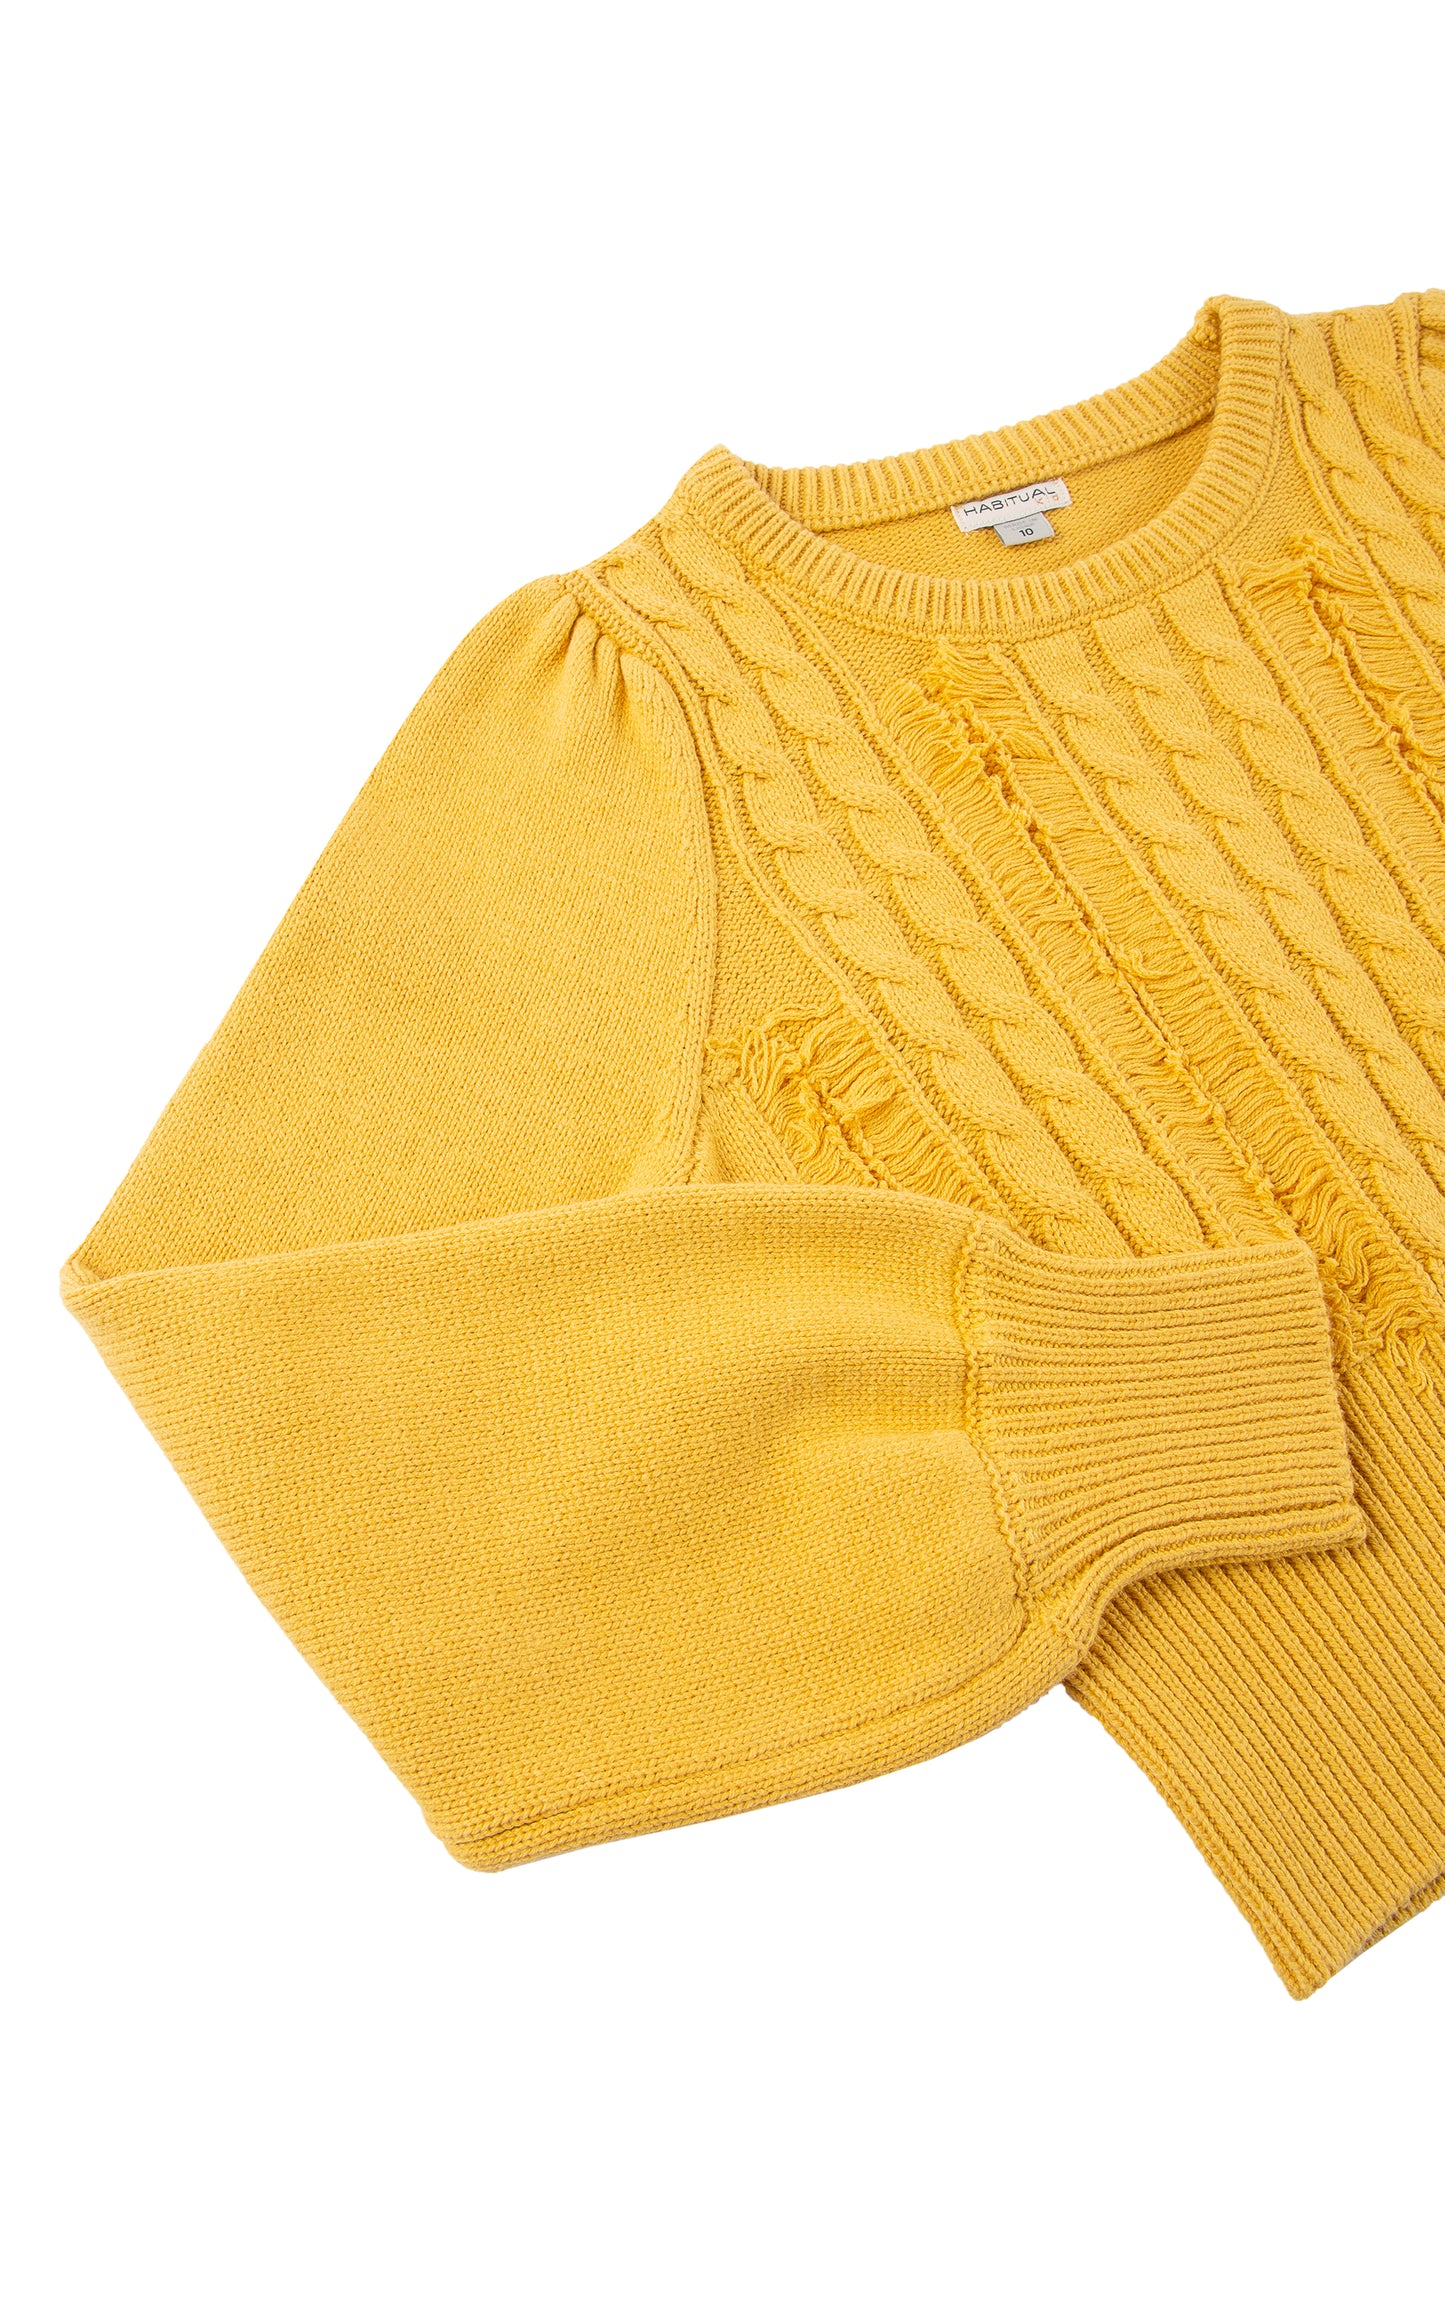 Side view of a yellow cable-knit sweater with fringe detailing